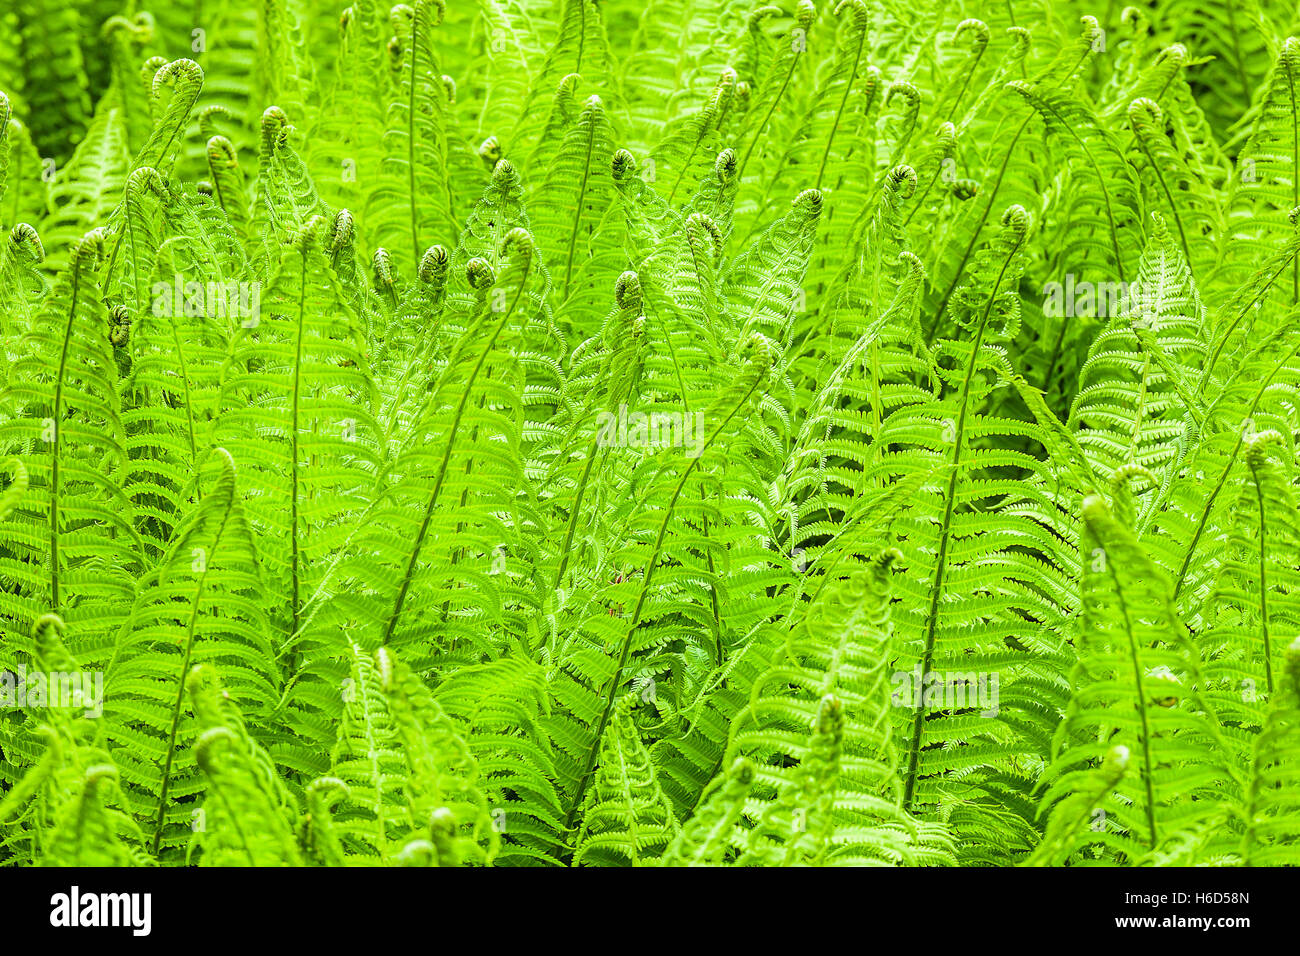 Abstract natural green growing fern (Athyrium filix-femina) background lightened with soft light Stock Photo